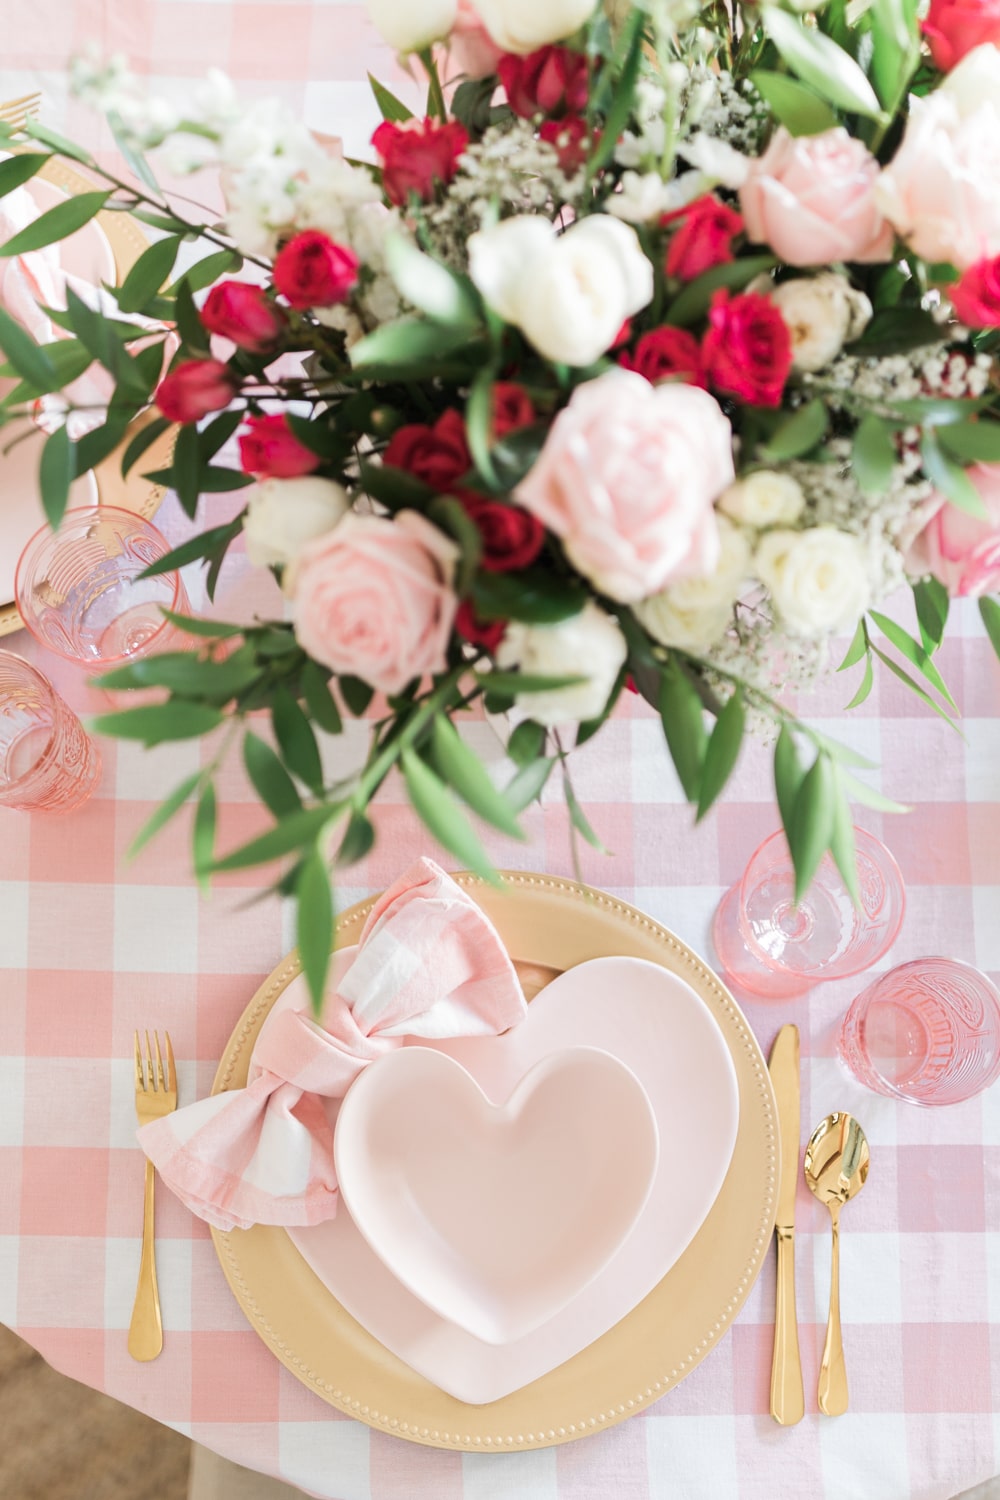 Blogger Stephanie Ziajka shares ideas for valentines table decorations on Diary of a Debutante